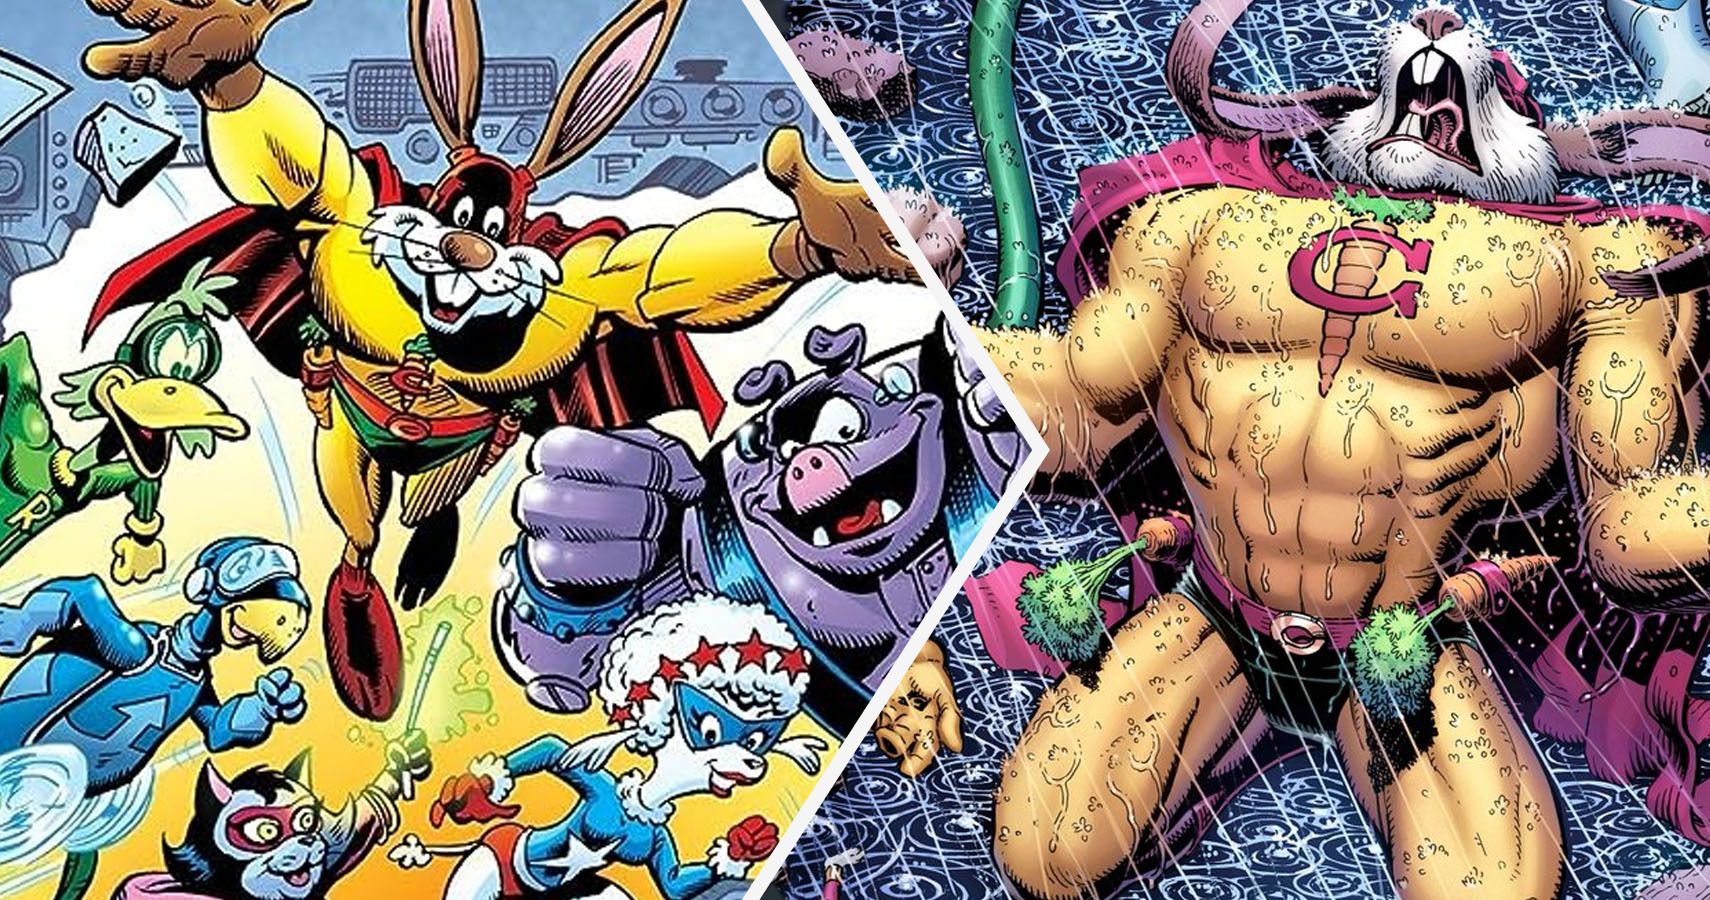 A split image of Captain Carrot and the Zoo Crew and Captain Carrot crying in DC Comics